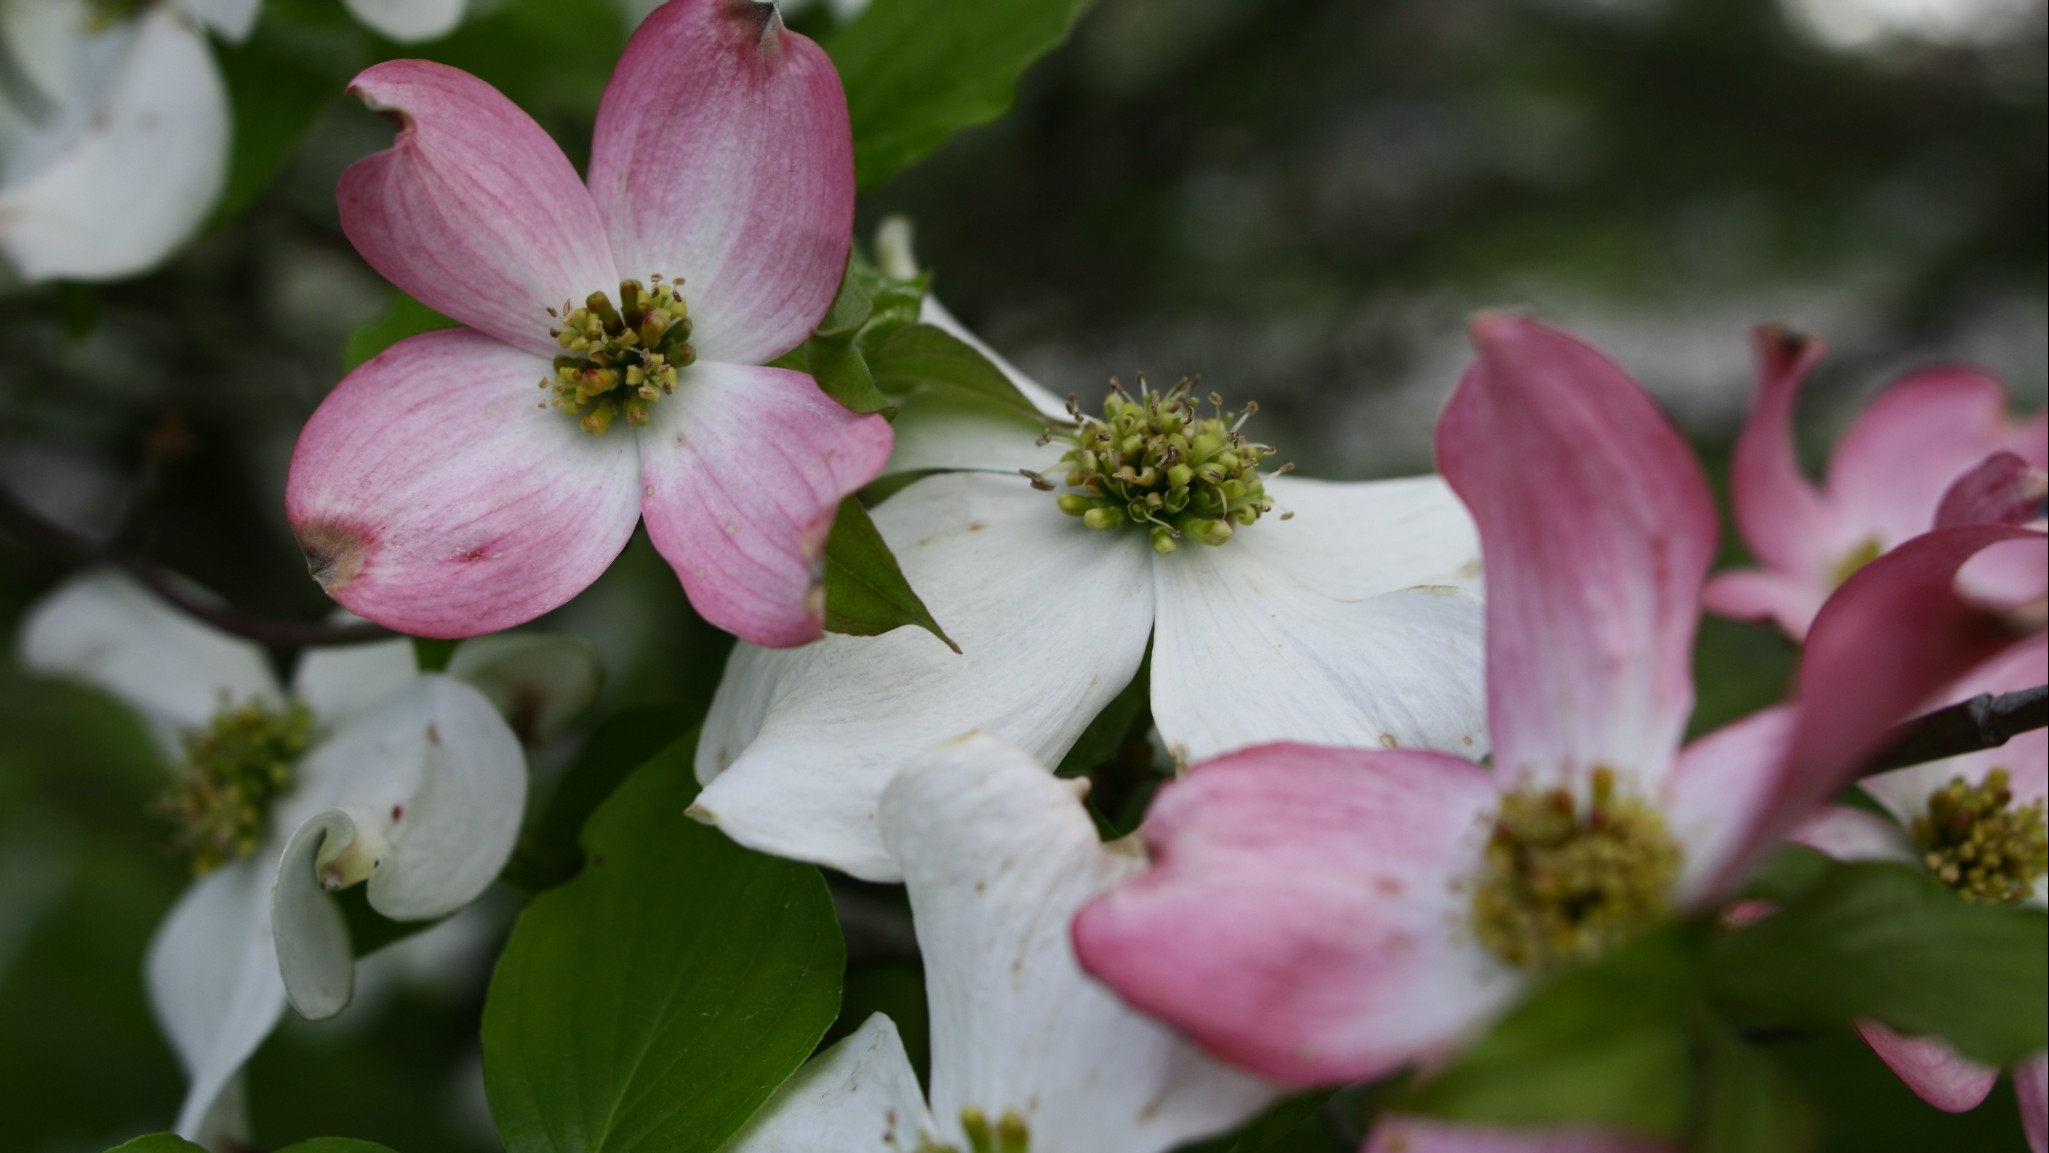 A blooming dogwood flower